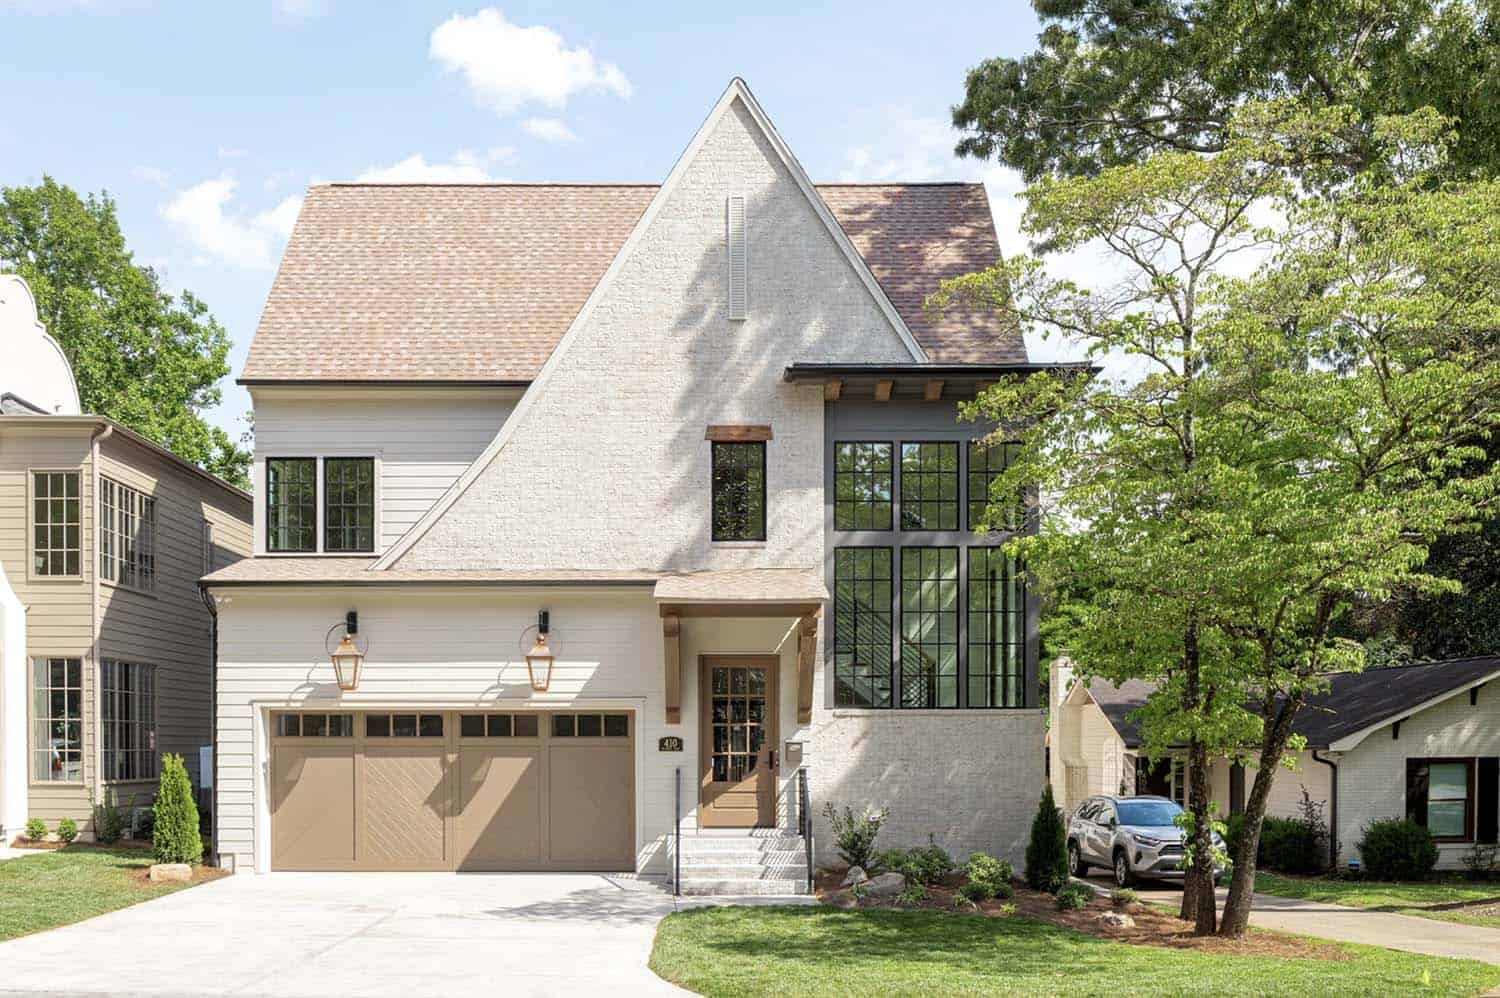 A modern yet warm Tudor home in Charlotte offers timeless curb appeal